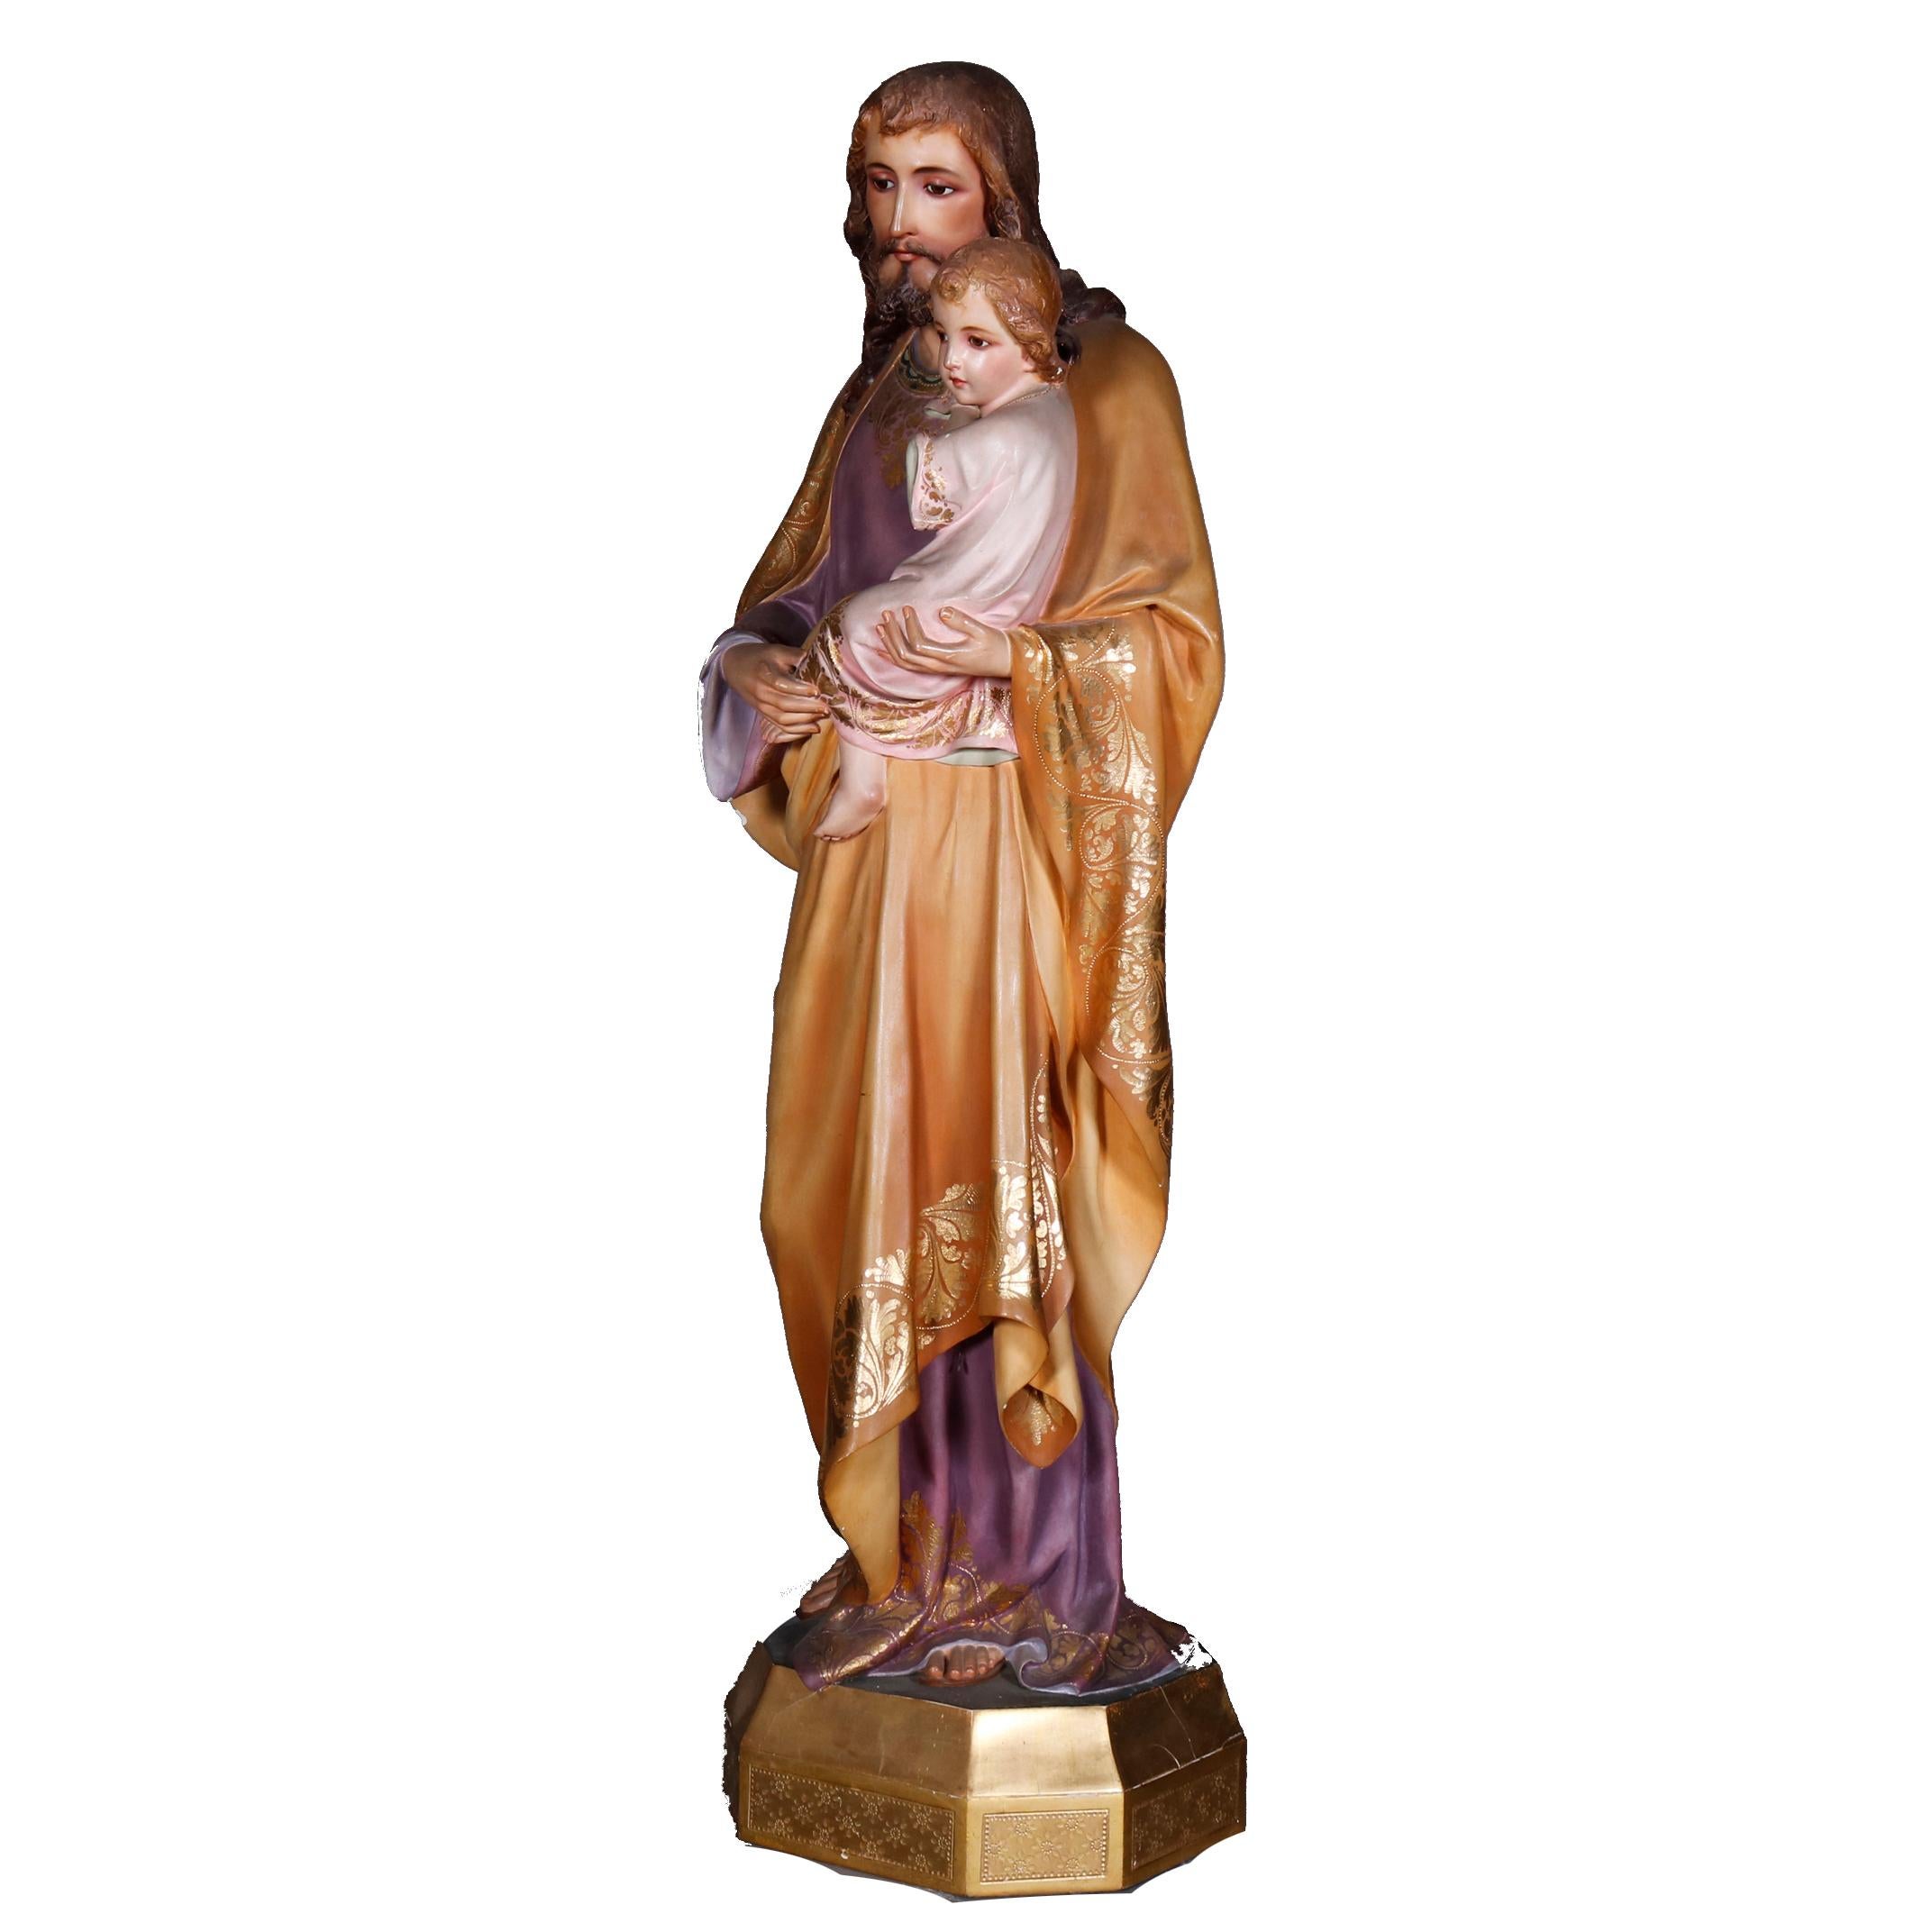 An antique and large full figure hollow cast plaster sculptural statue by Castellan's Workshop offers hand painted and gilt Christian figure of Joseph and The Christ Child, title block reads 